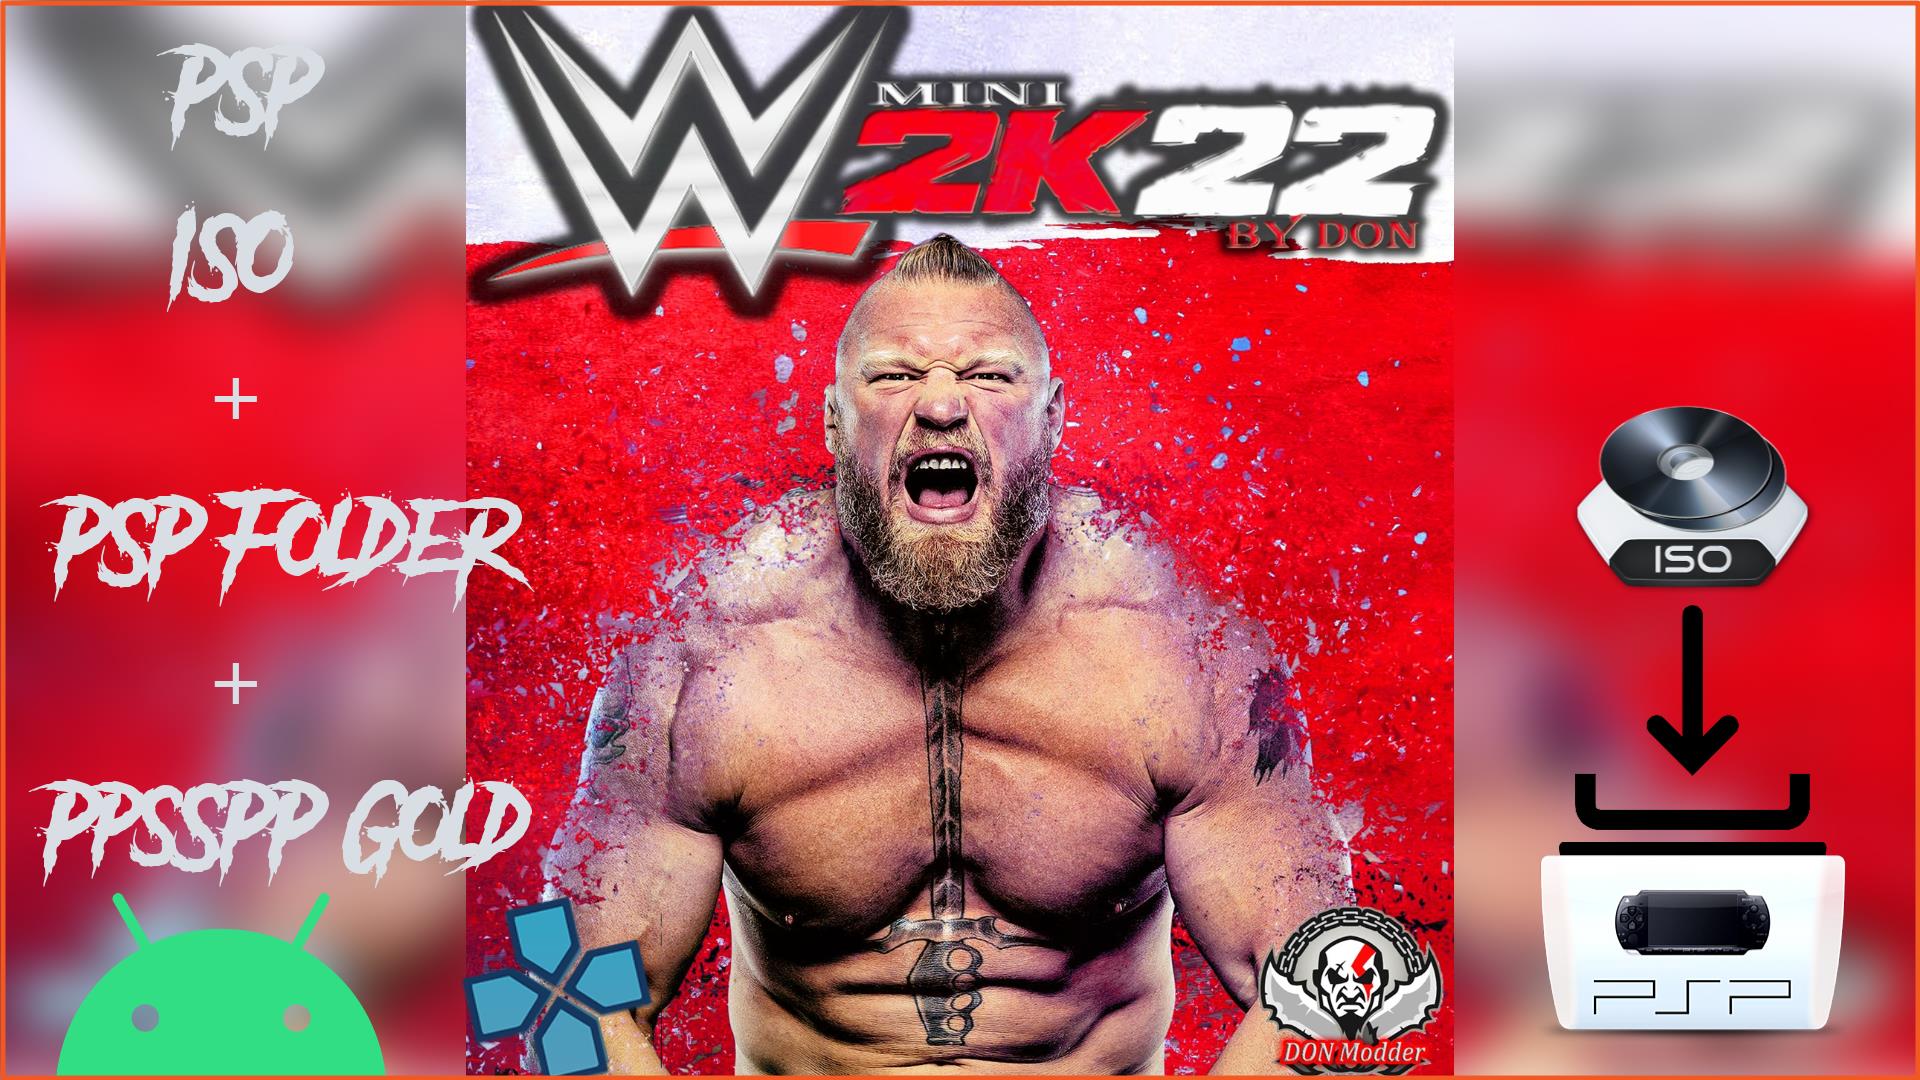 how to download WWE 2k22 ppsspp in PPSSPP｜TikTok Search